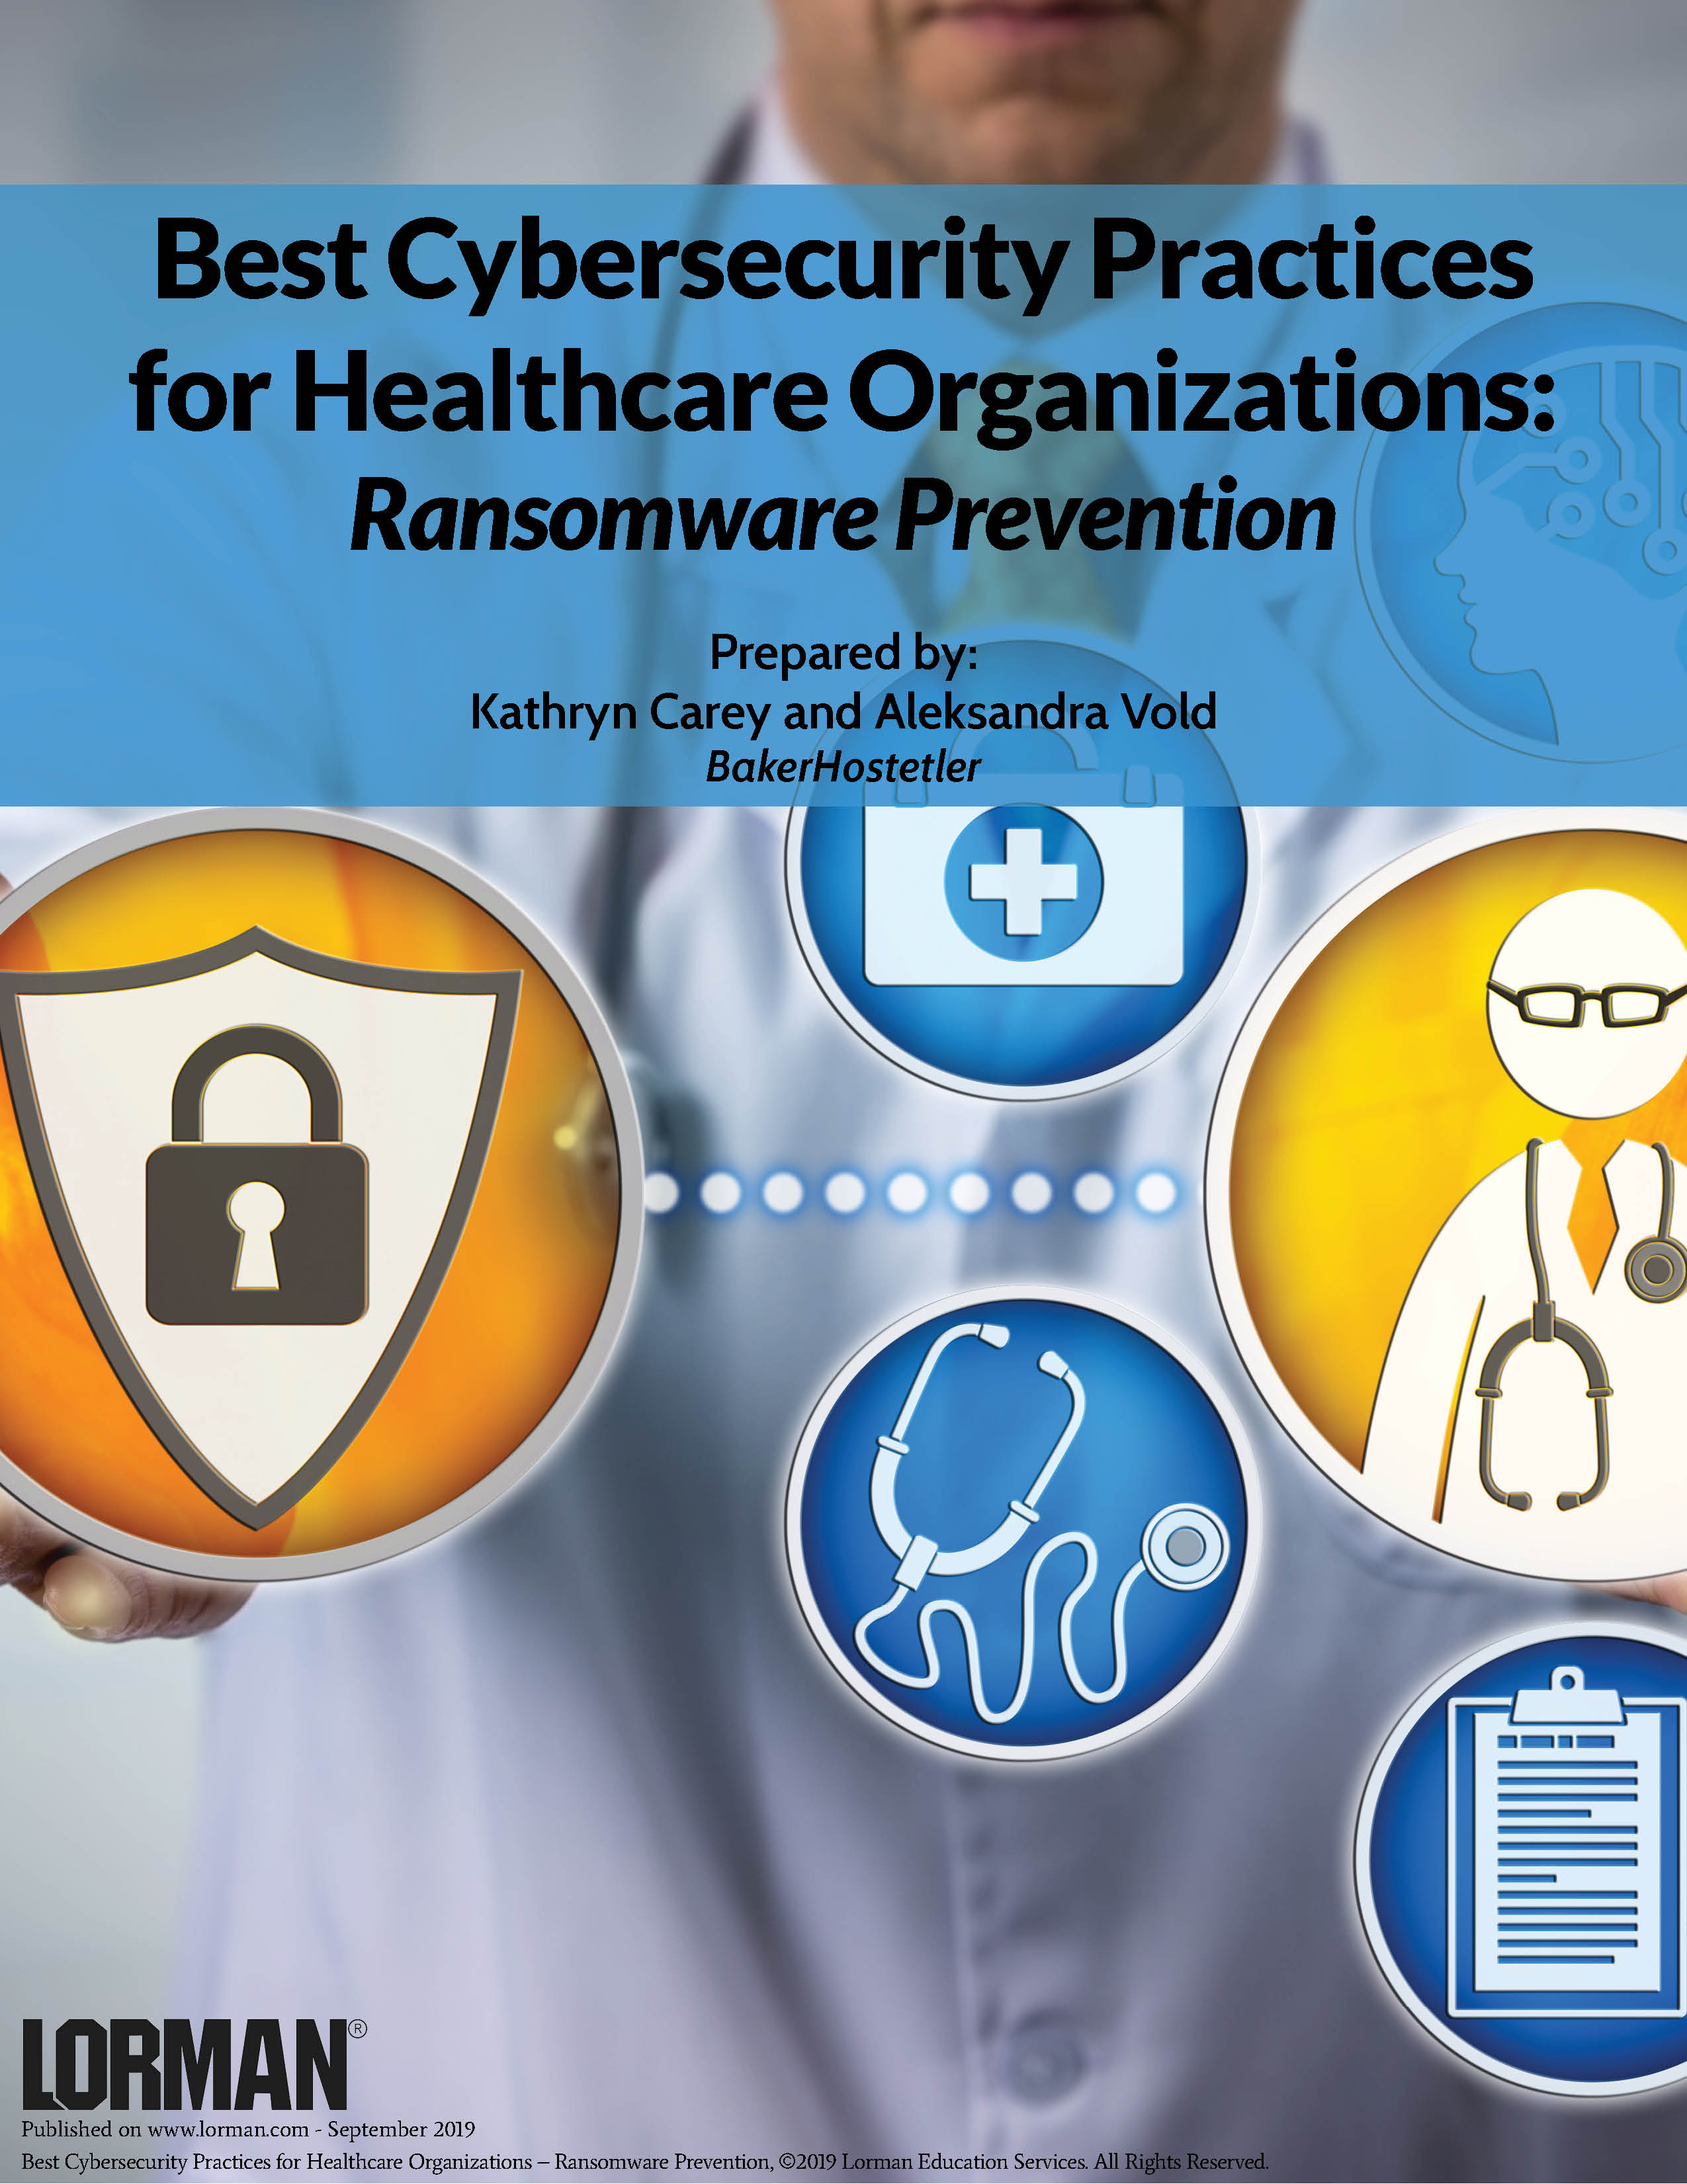 Best Cybersecurity Practices for Healthcare Organizations: Ransomware Prevention